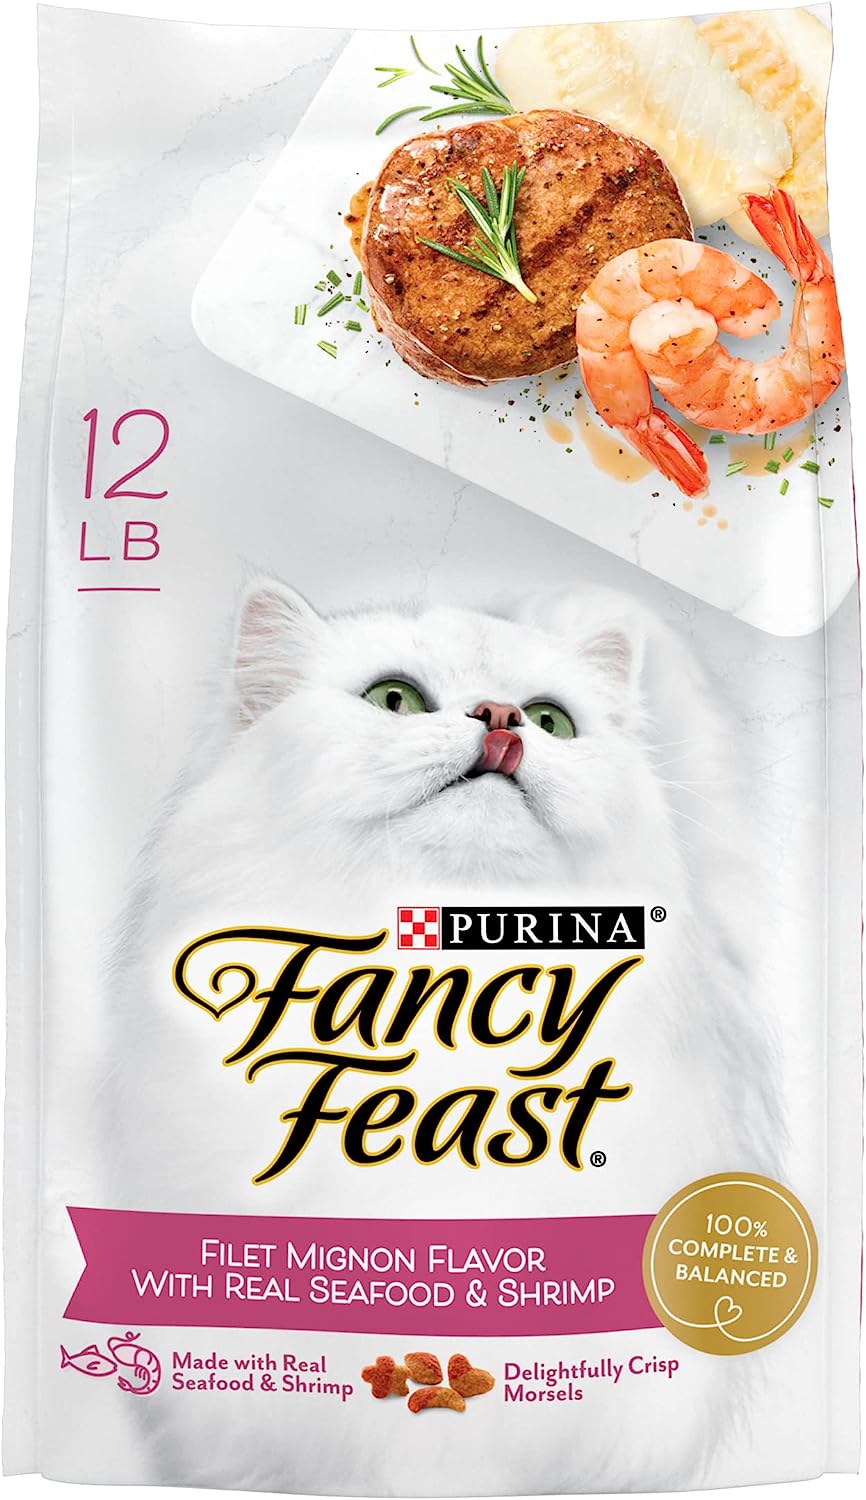 Purina Fancy Feast Dry Cat Food Filet Mignon Flavor with Seafood and Shrimp - 12 lb. Bag